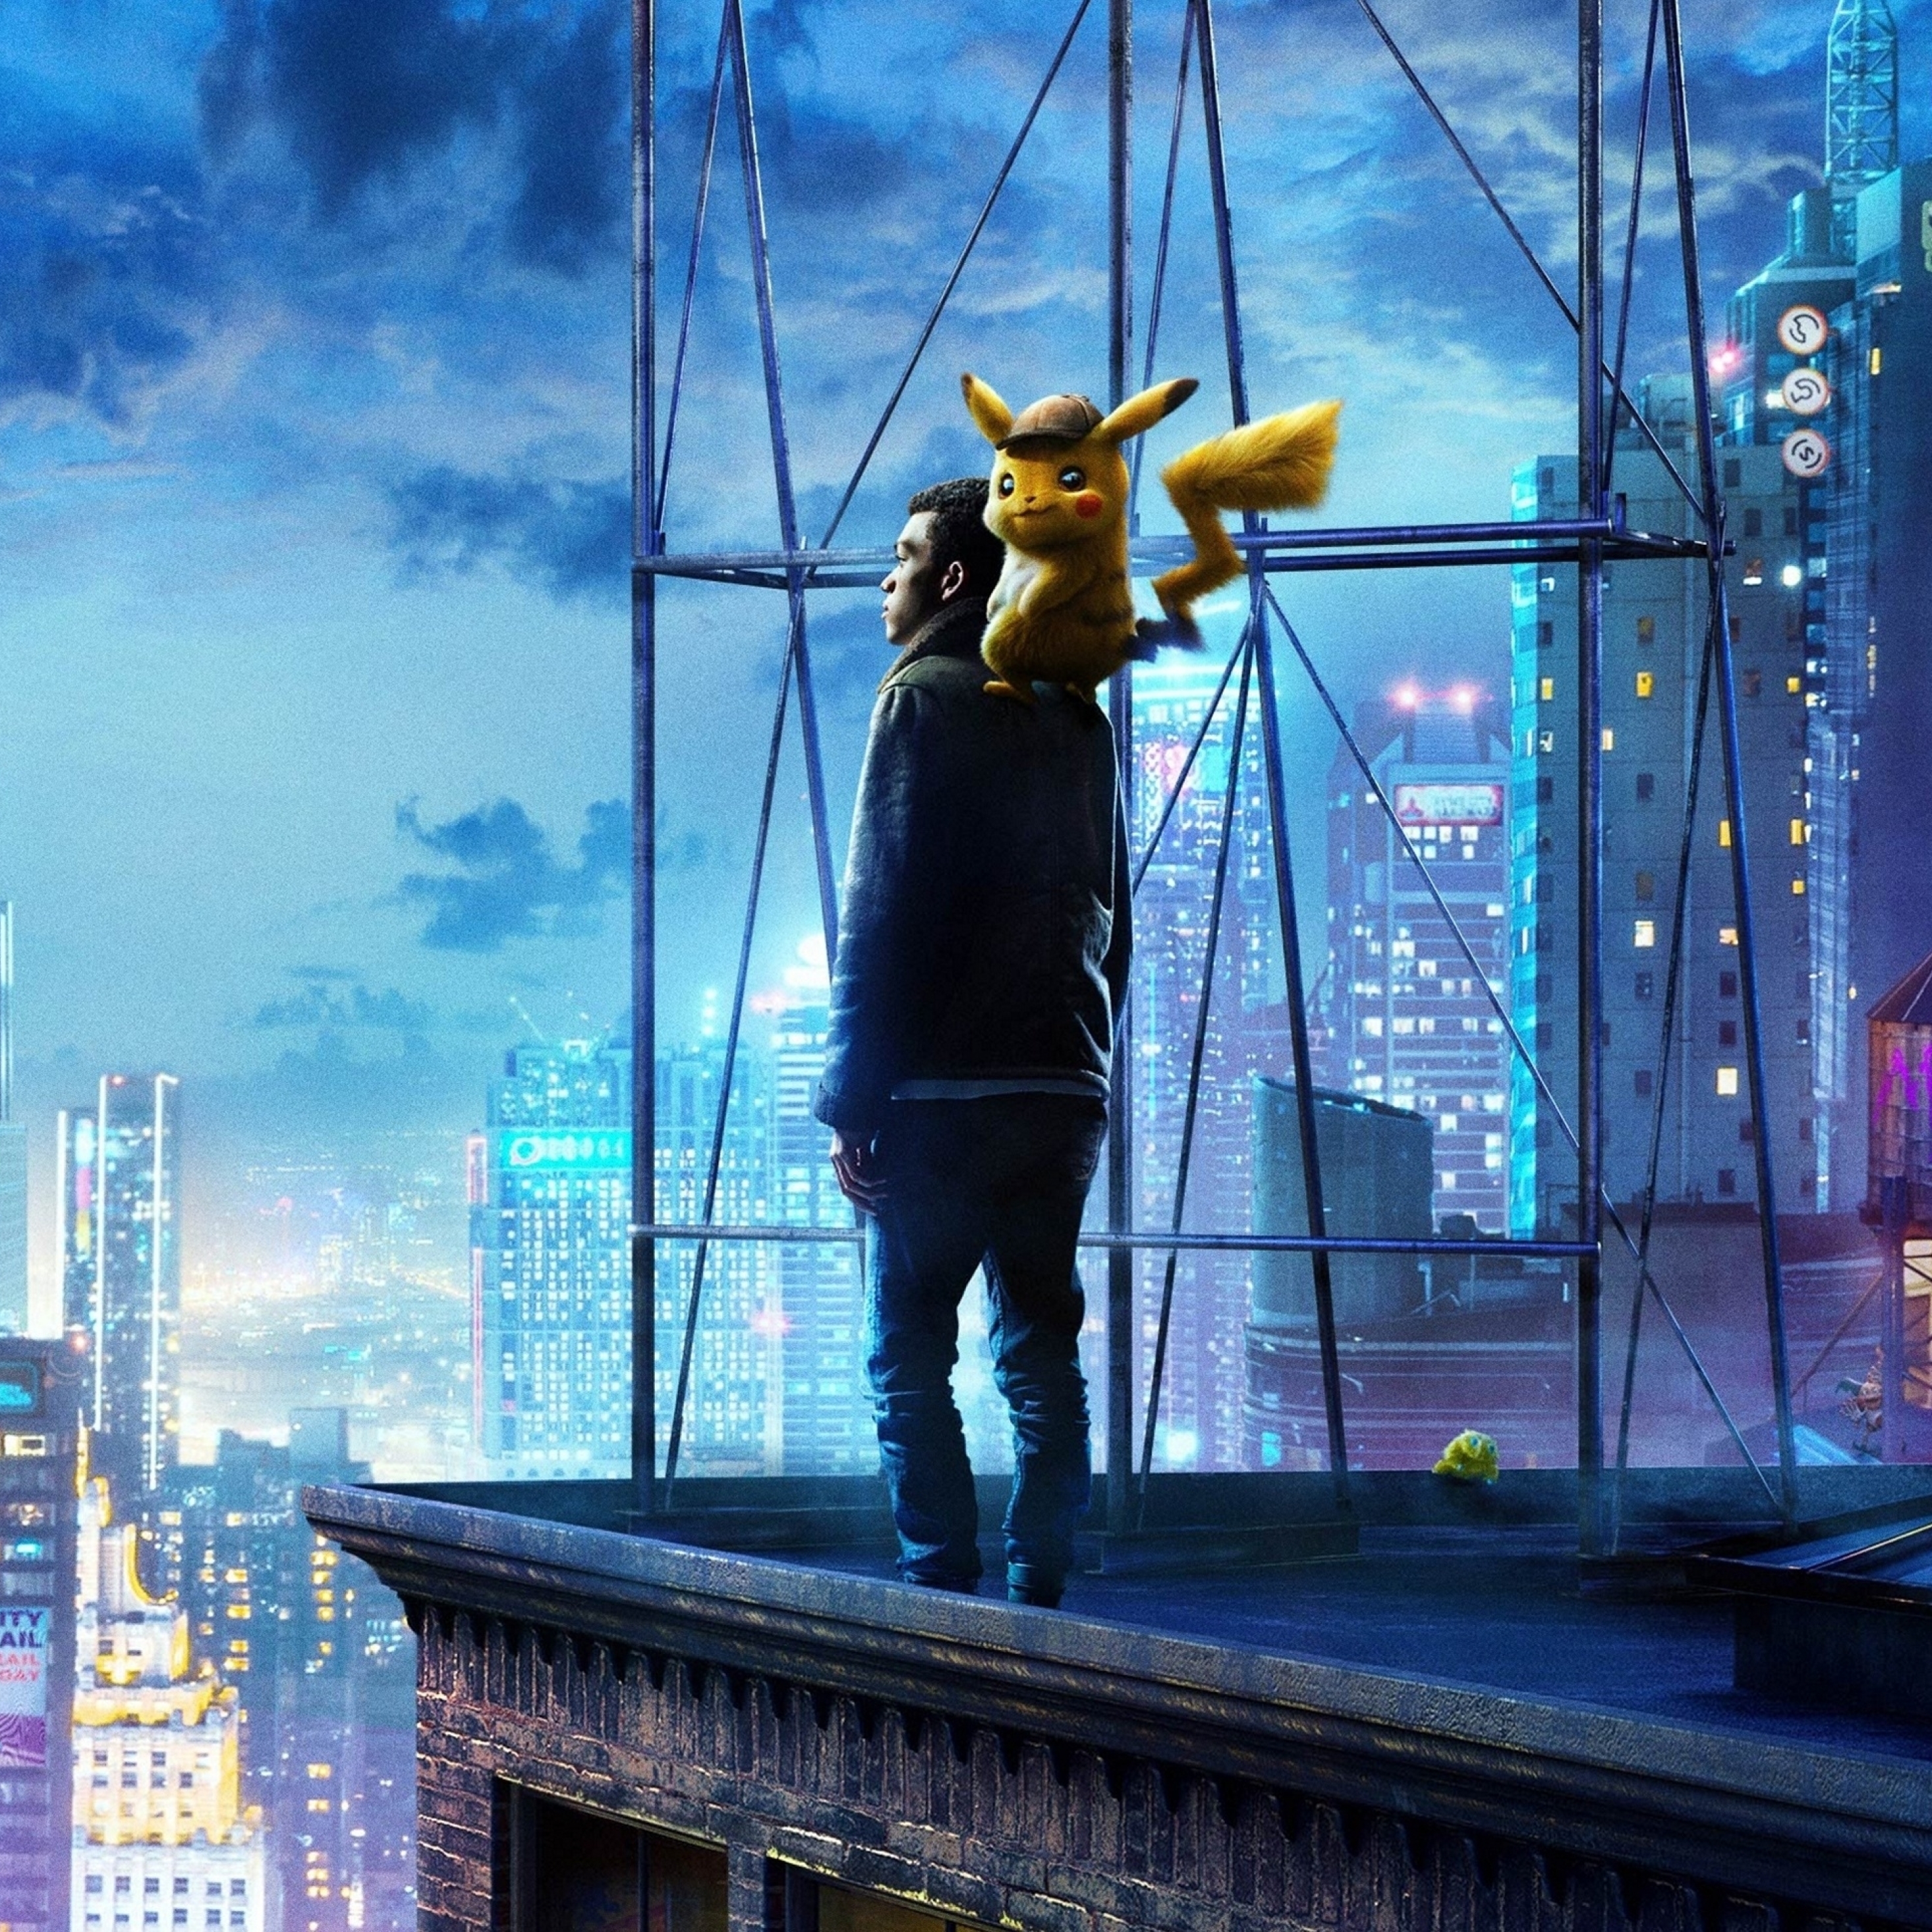 2932x2932 Pokemon Detective Pikachu 19 Movie Ipad Pro Retina Display Wallpaper Hd Movies 4k Wallpapers Images Photos And Background Wallpapers Den